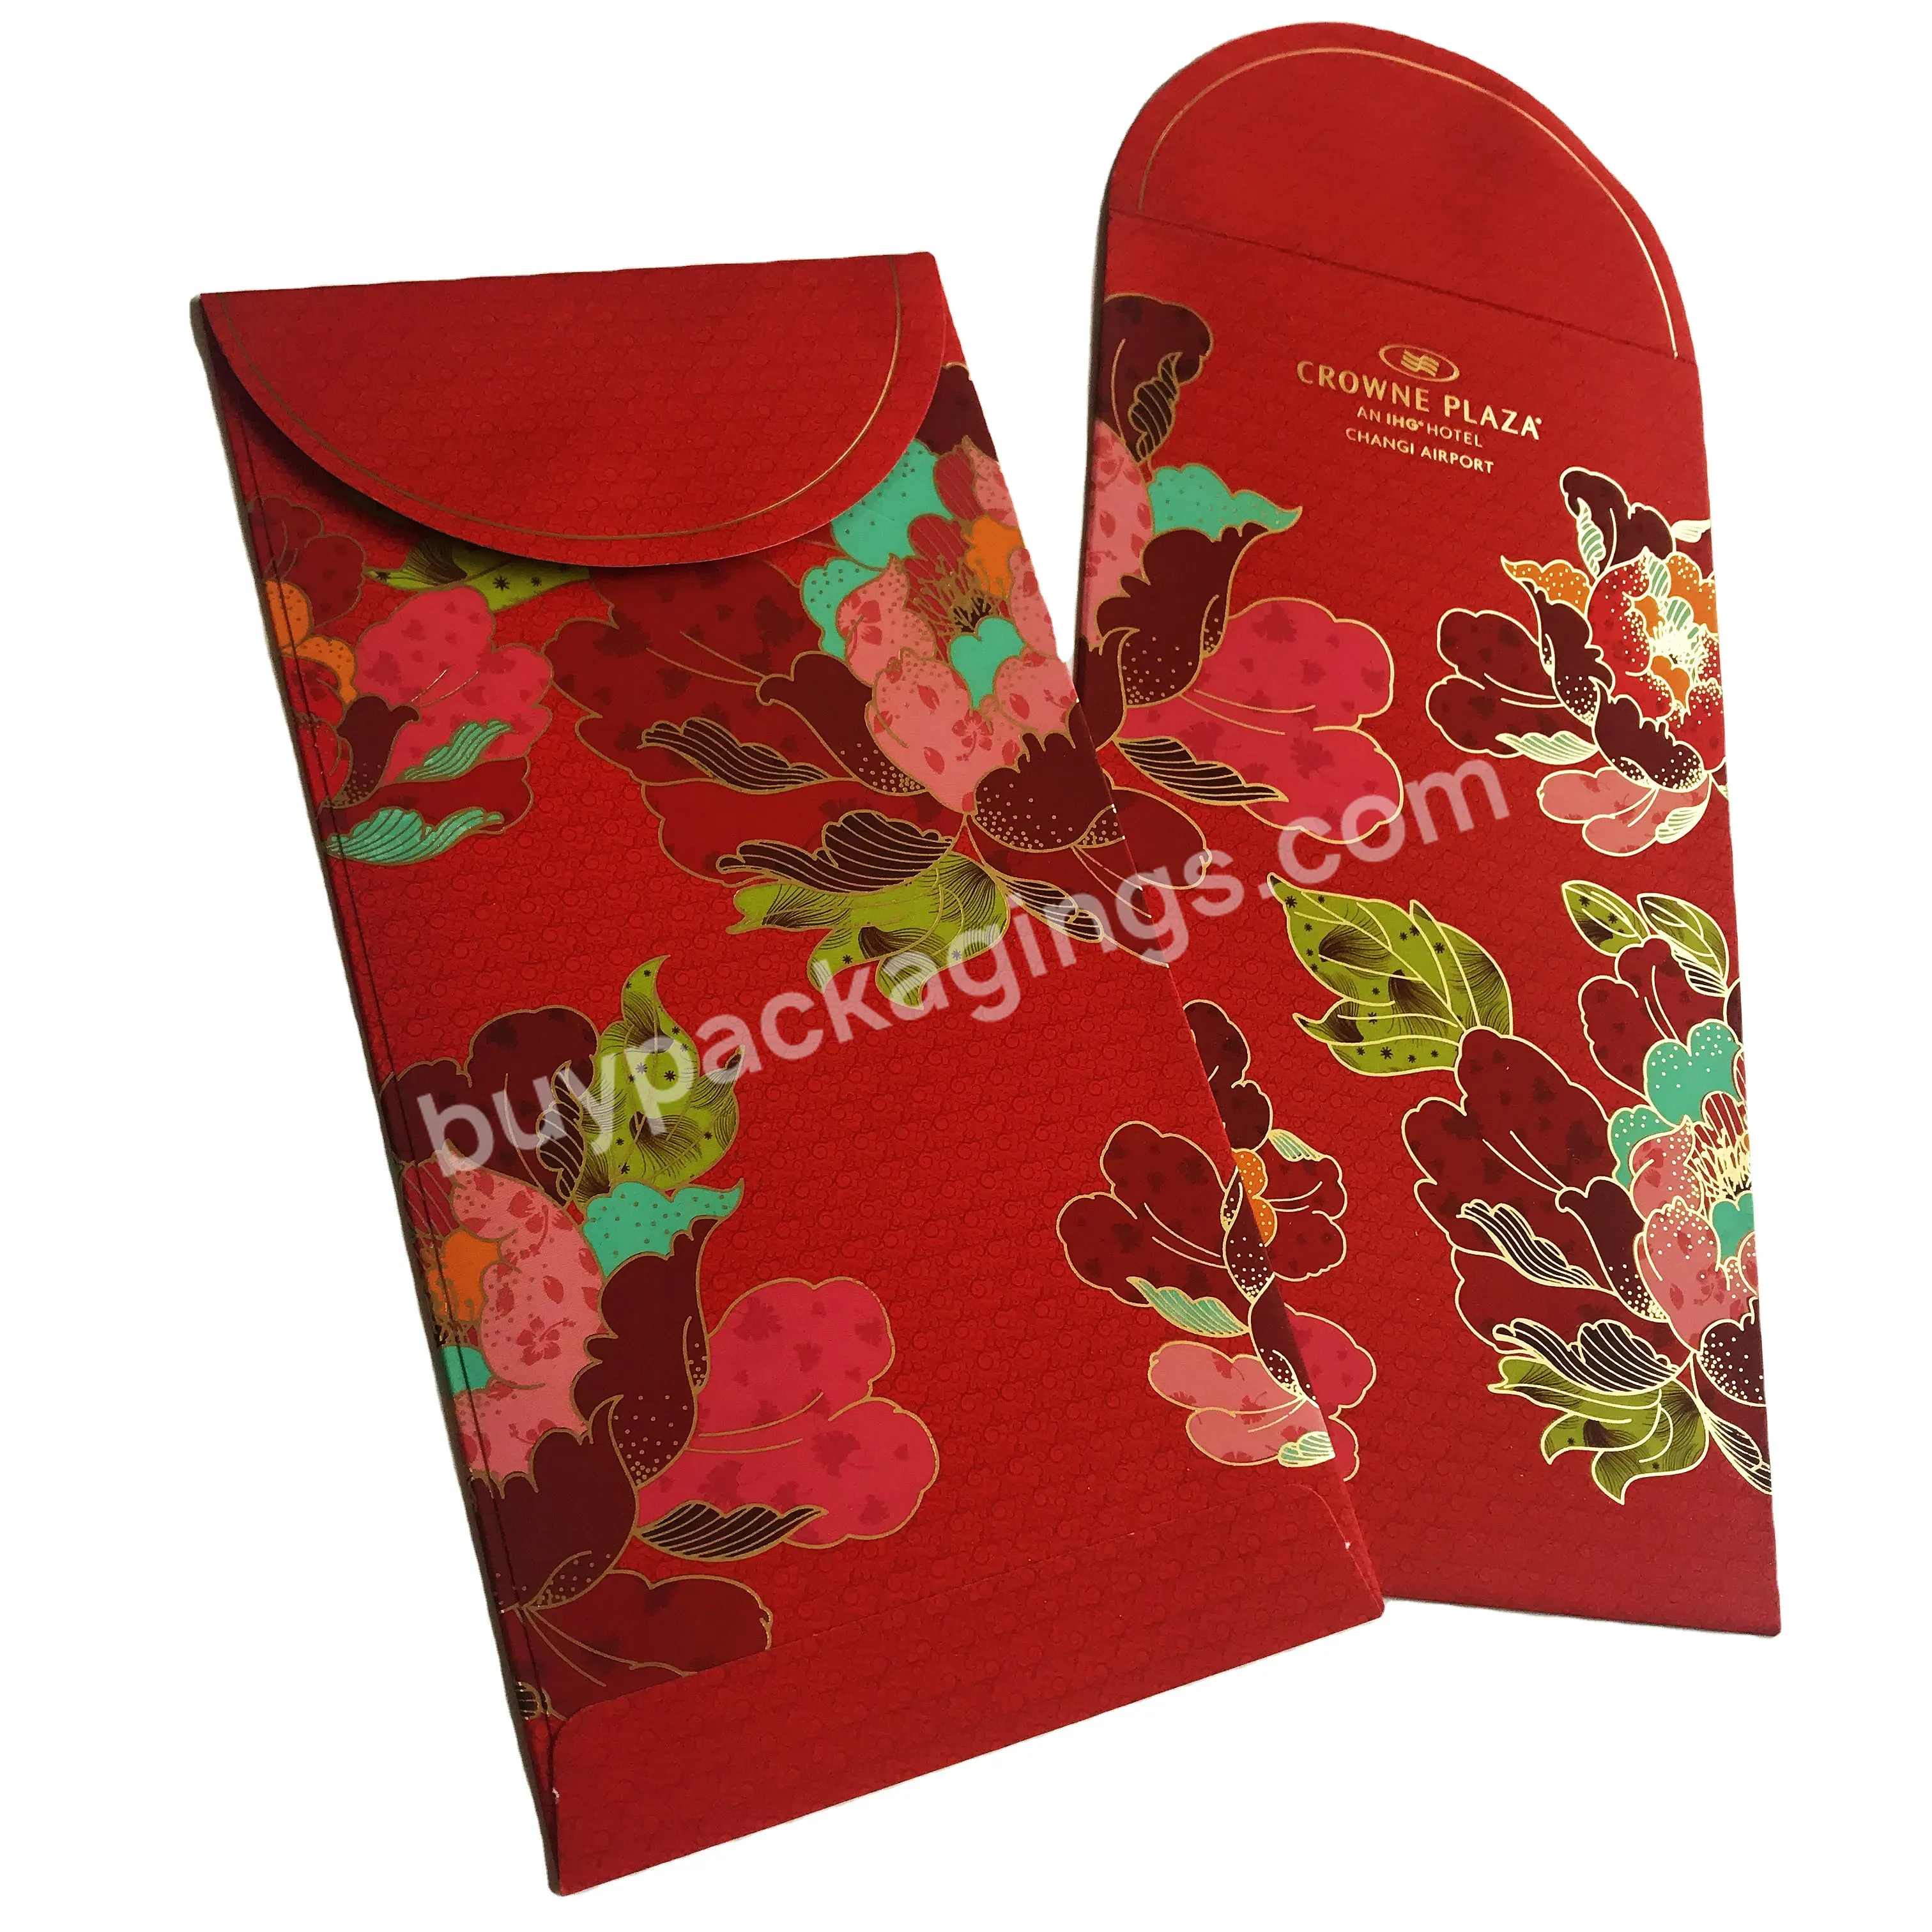 Customized Red Packet New Year Chinese Traditional Hong Bao Greeting Lucky Money Wallet Gift Envelope - Buy Ang Bao,Chinese New Year Red Pocket,Lucky Money Wallet Gift Envelope.